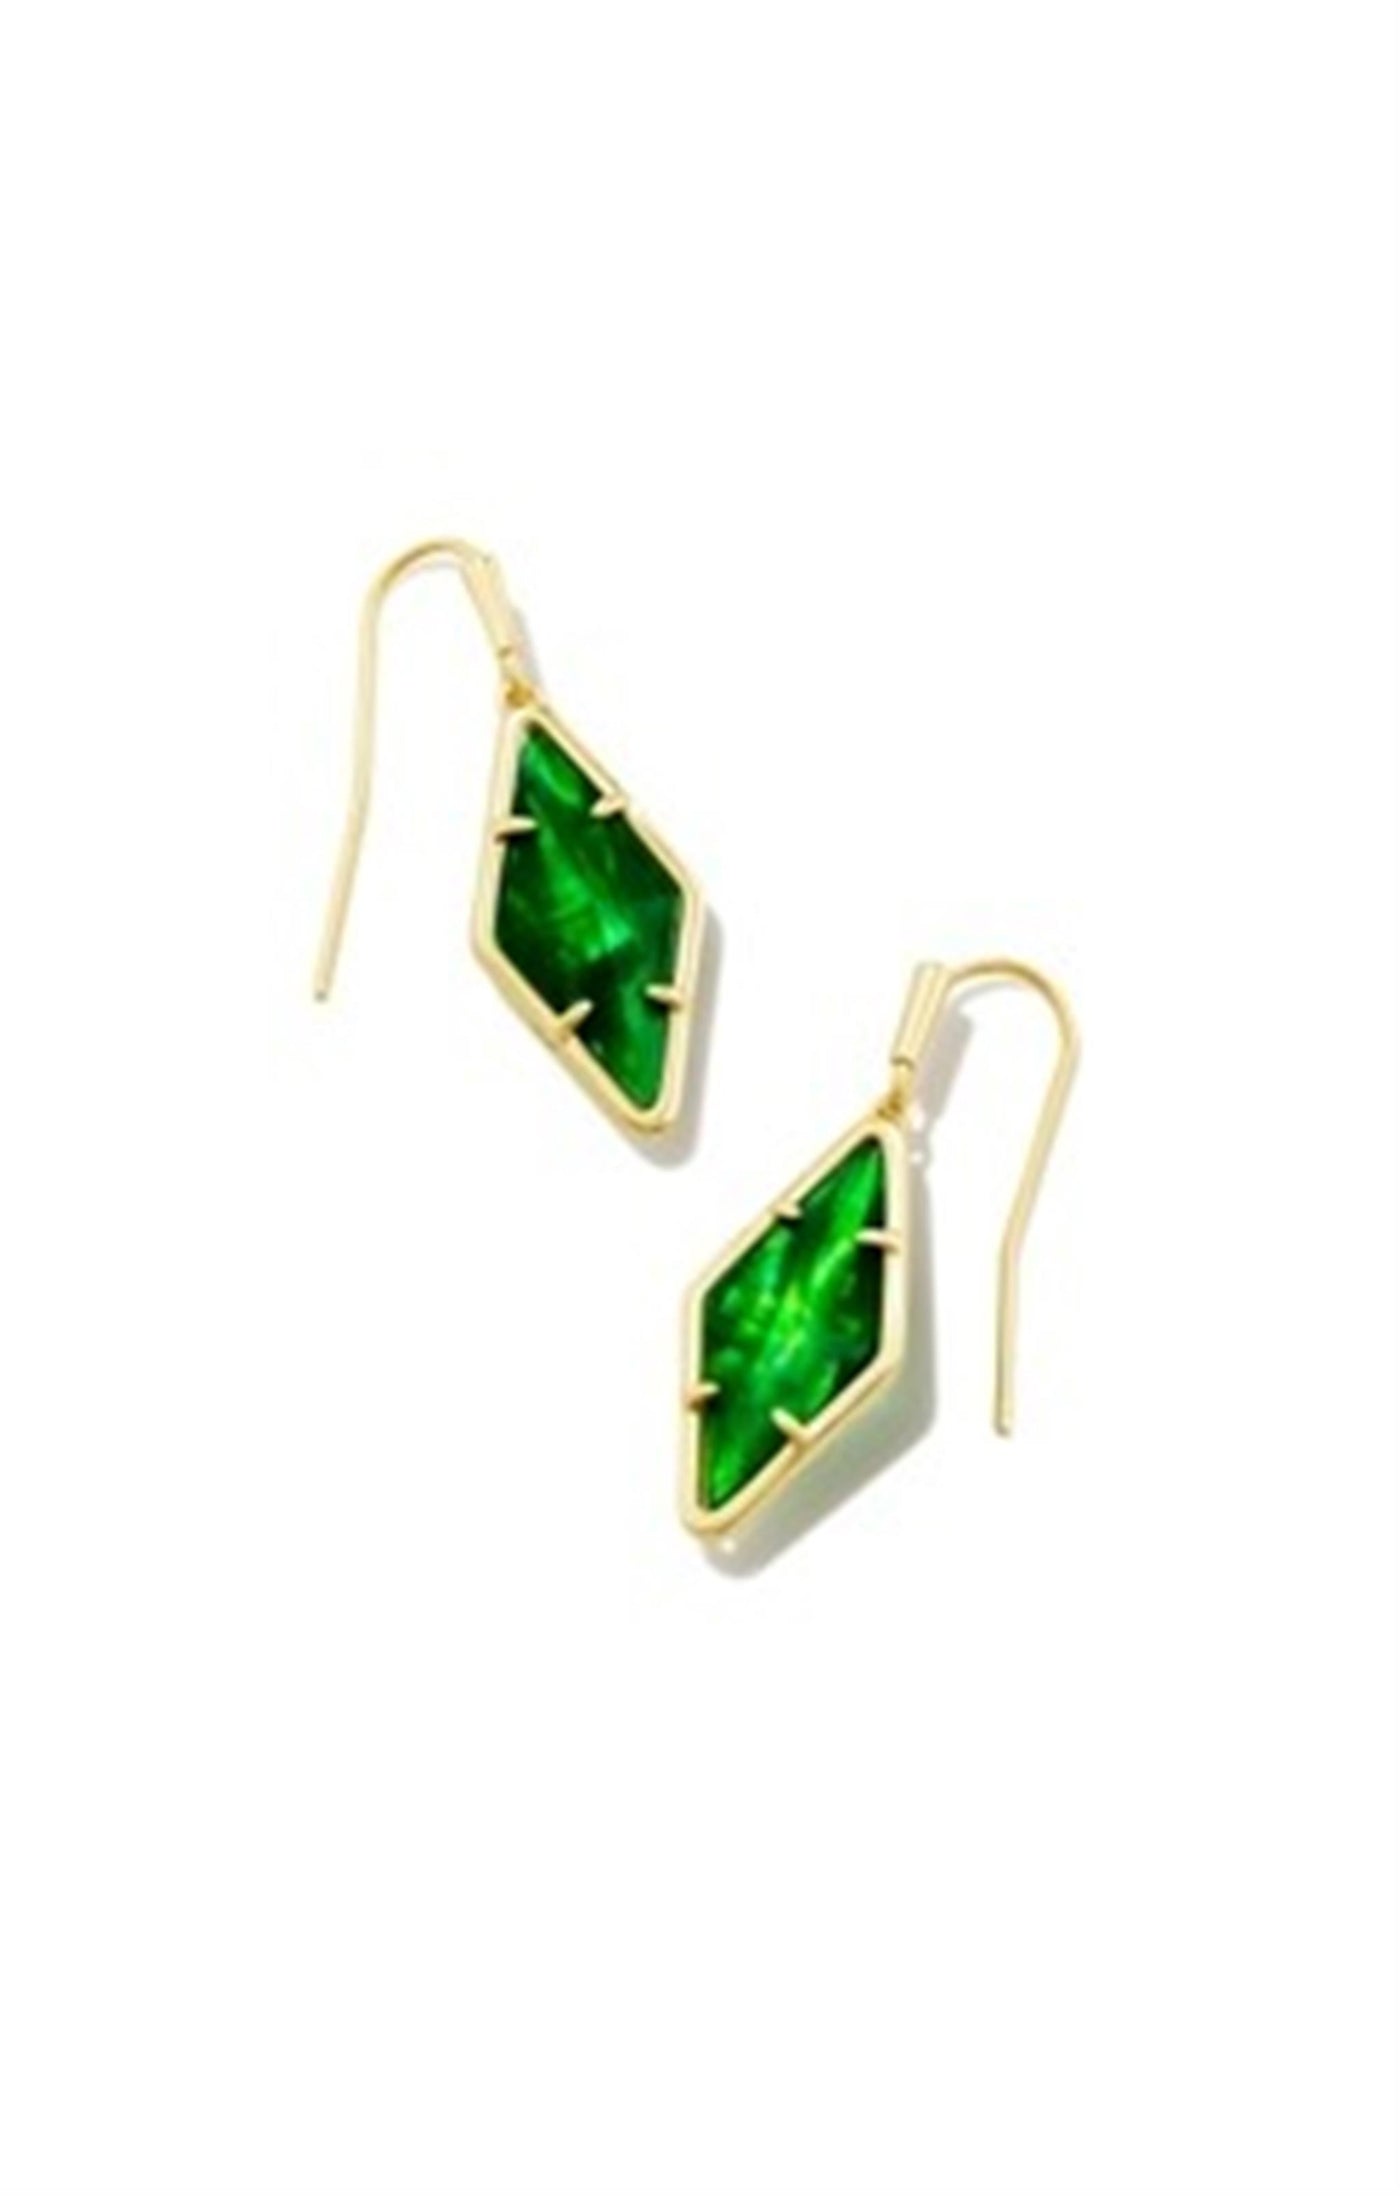 Gold Tone Earrings Featuring Green Illusion by Kendra Scott